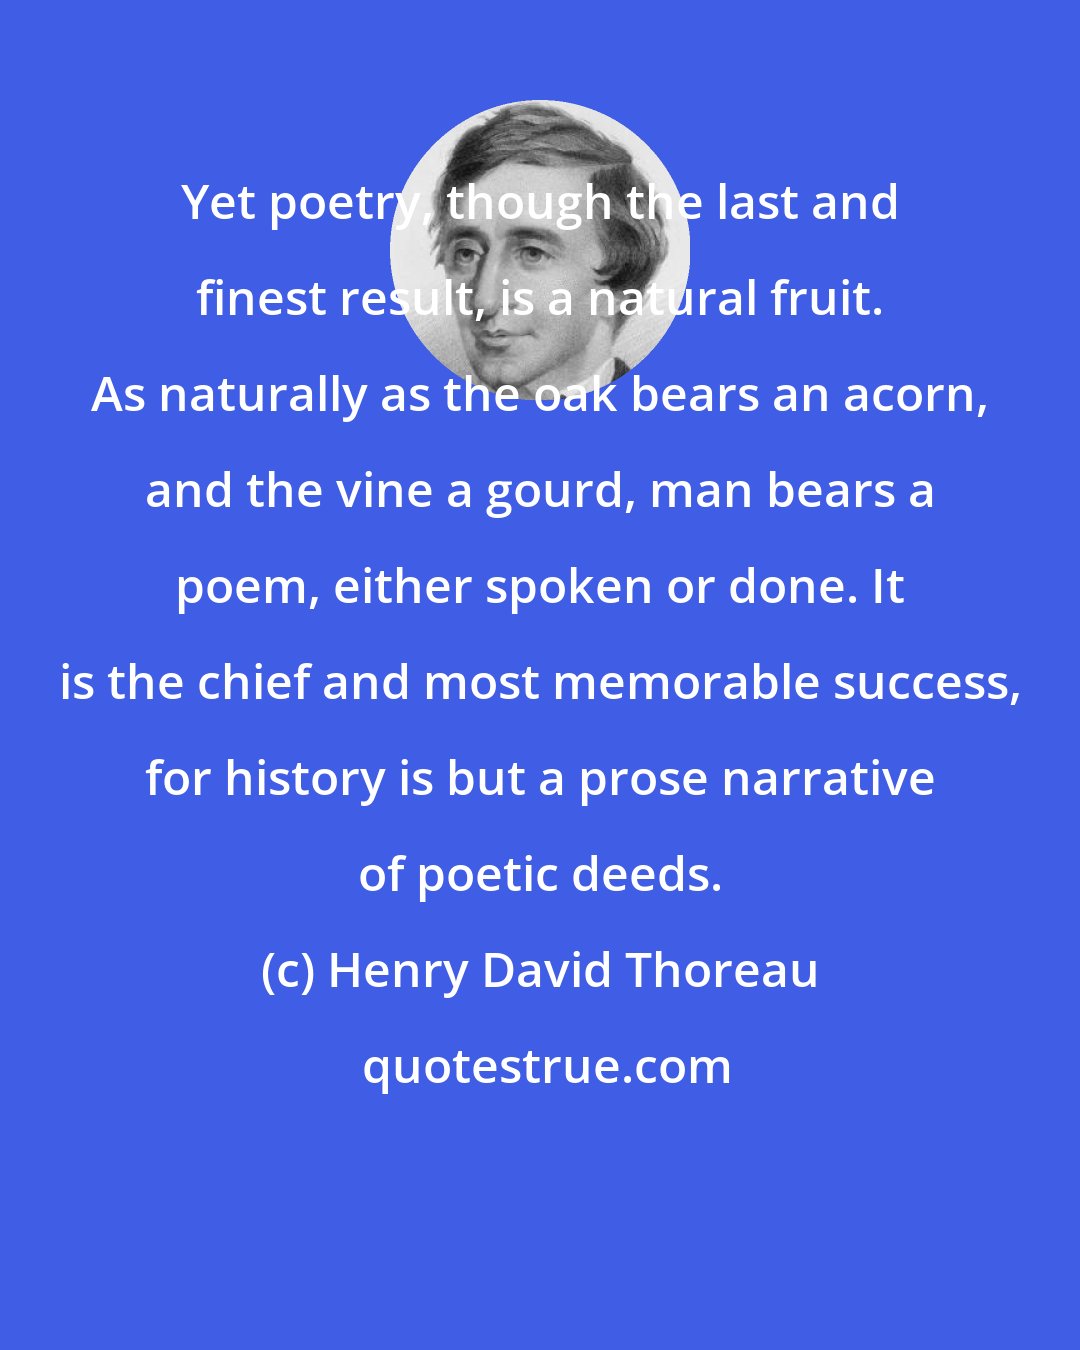 Henry David Thoreau: Yet poetry, though the last and finest result, is a natural fruit. As naturally as the oak bears an acorn, and the vine a gourd, man bears a poem, either spoken or done. It is the chief and most memorable success, for history is but a prose narrative of poetic deeds.